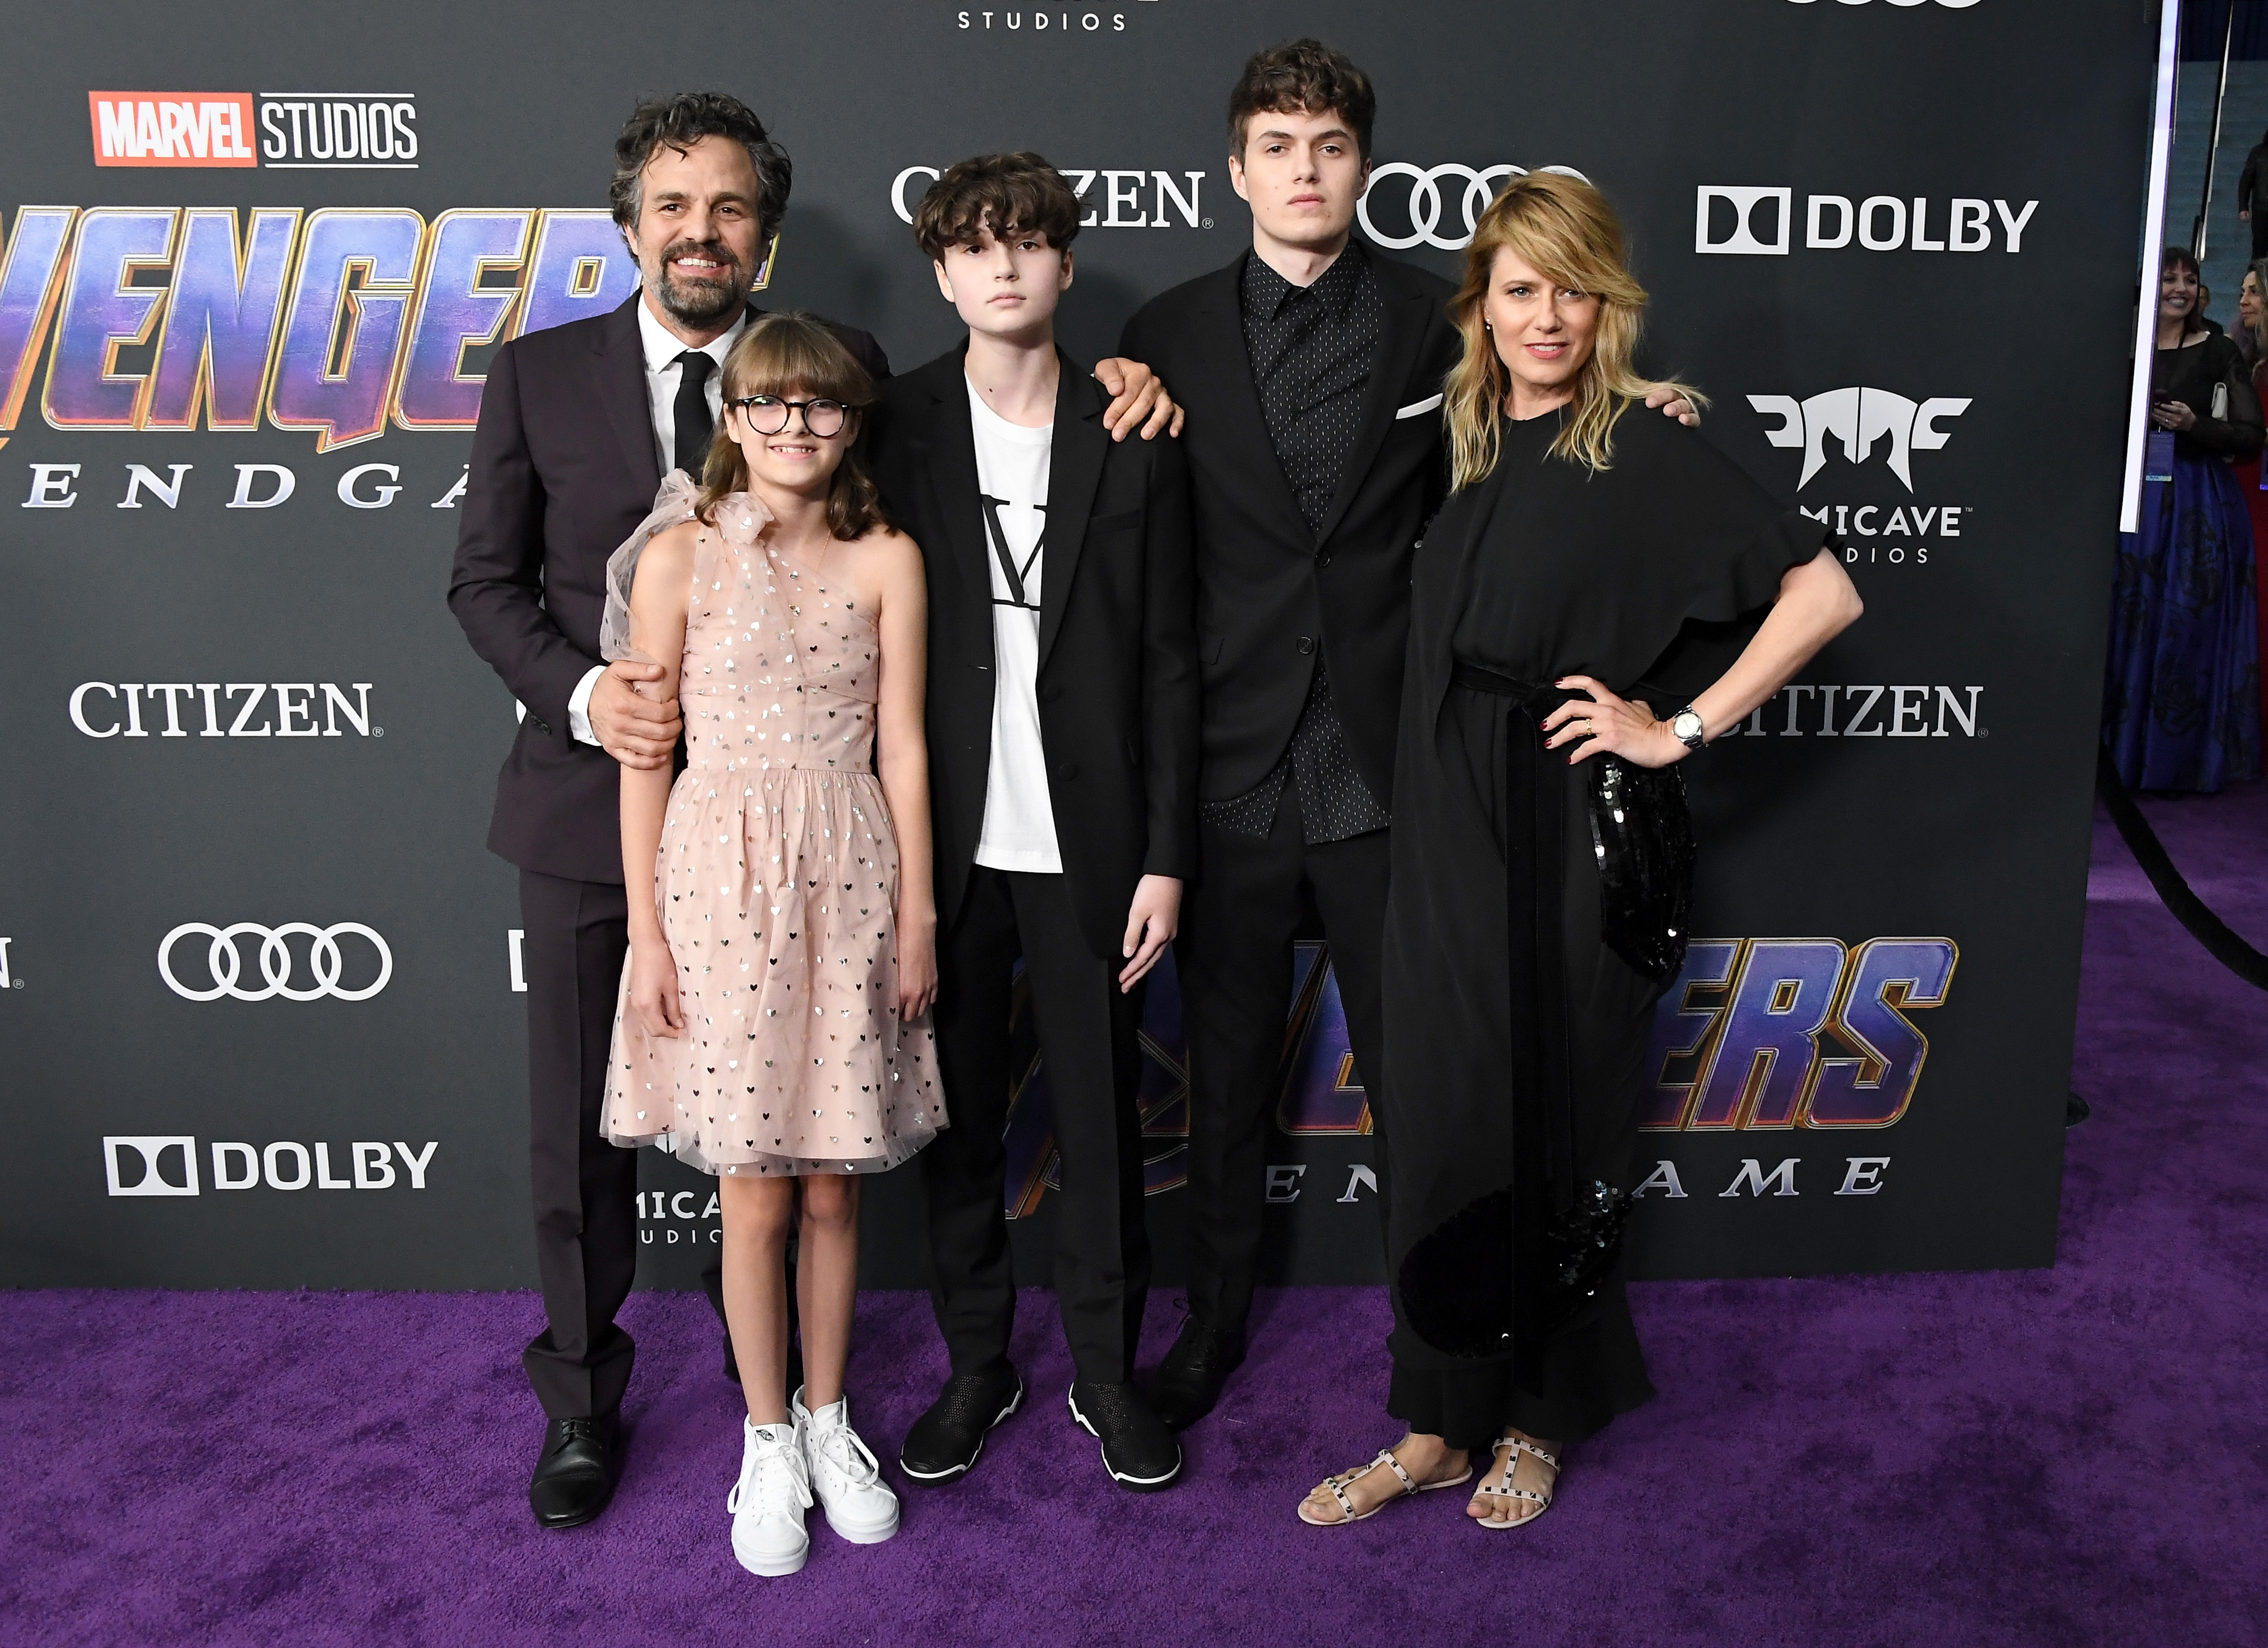 Mark, Odette, Bella Noche, Sunrise, and Keen Ruffalo at the premiere of "Avengers: Endgame" in Los Angeles, California on April 22, 2019 | Source: Getty Images